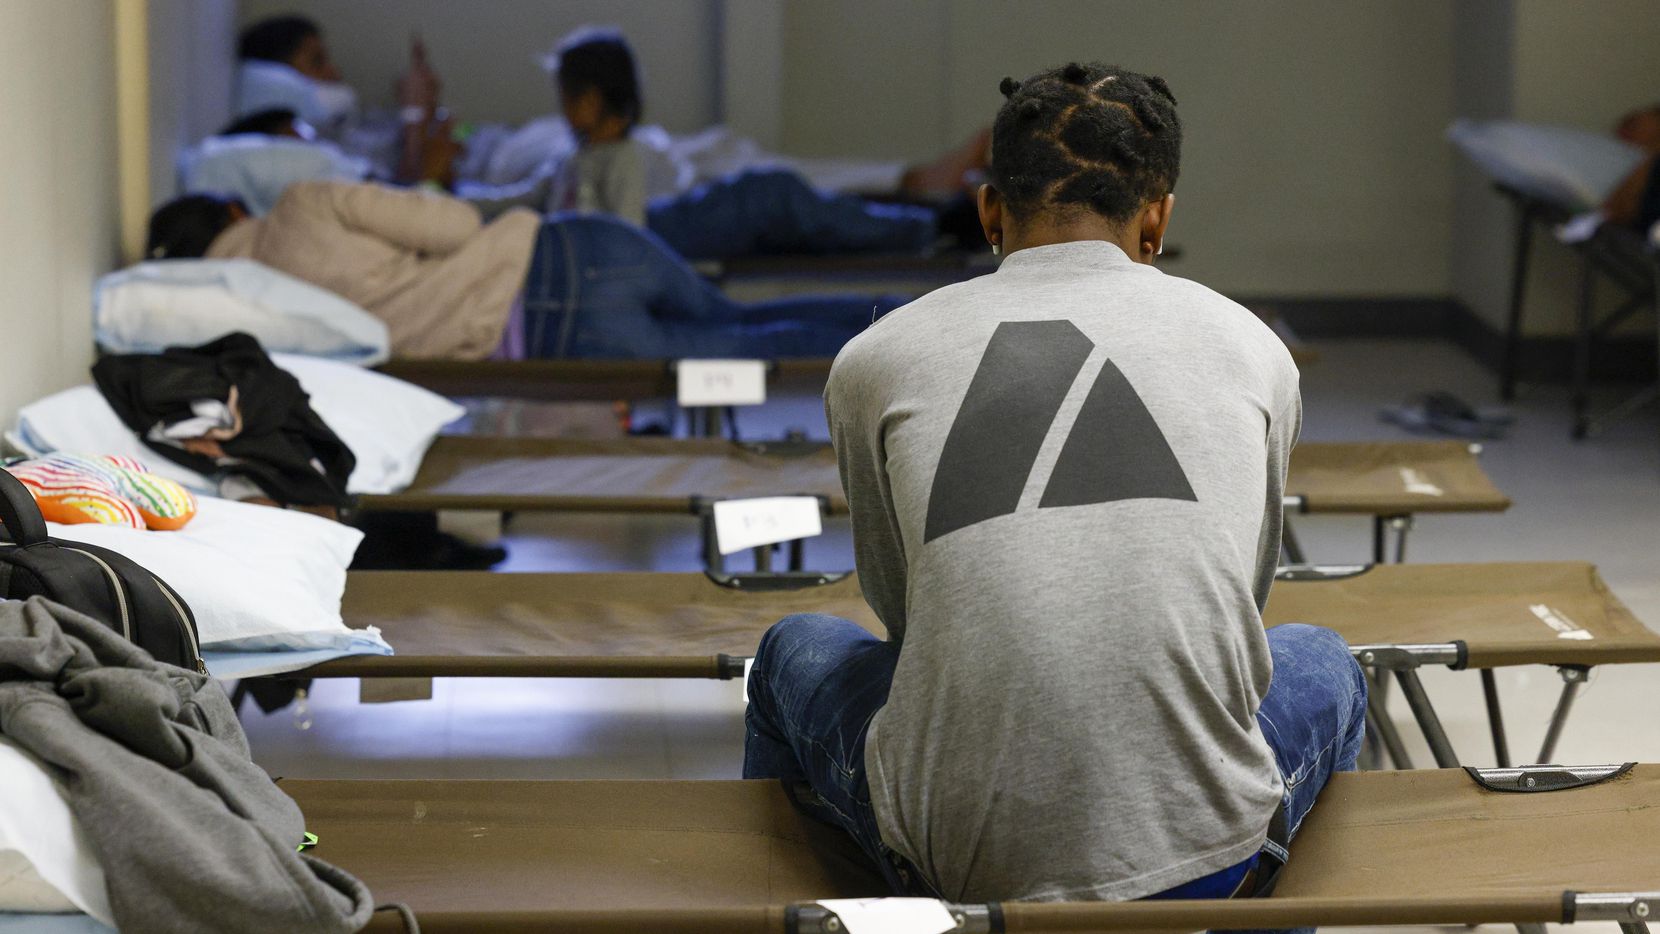 Migrants rest on cots in a room at Oak Lawn United Methodist Church in Dallas, Wednesday....